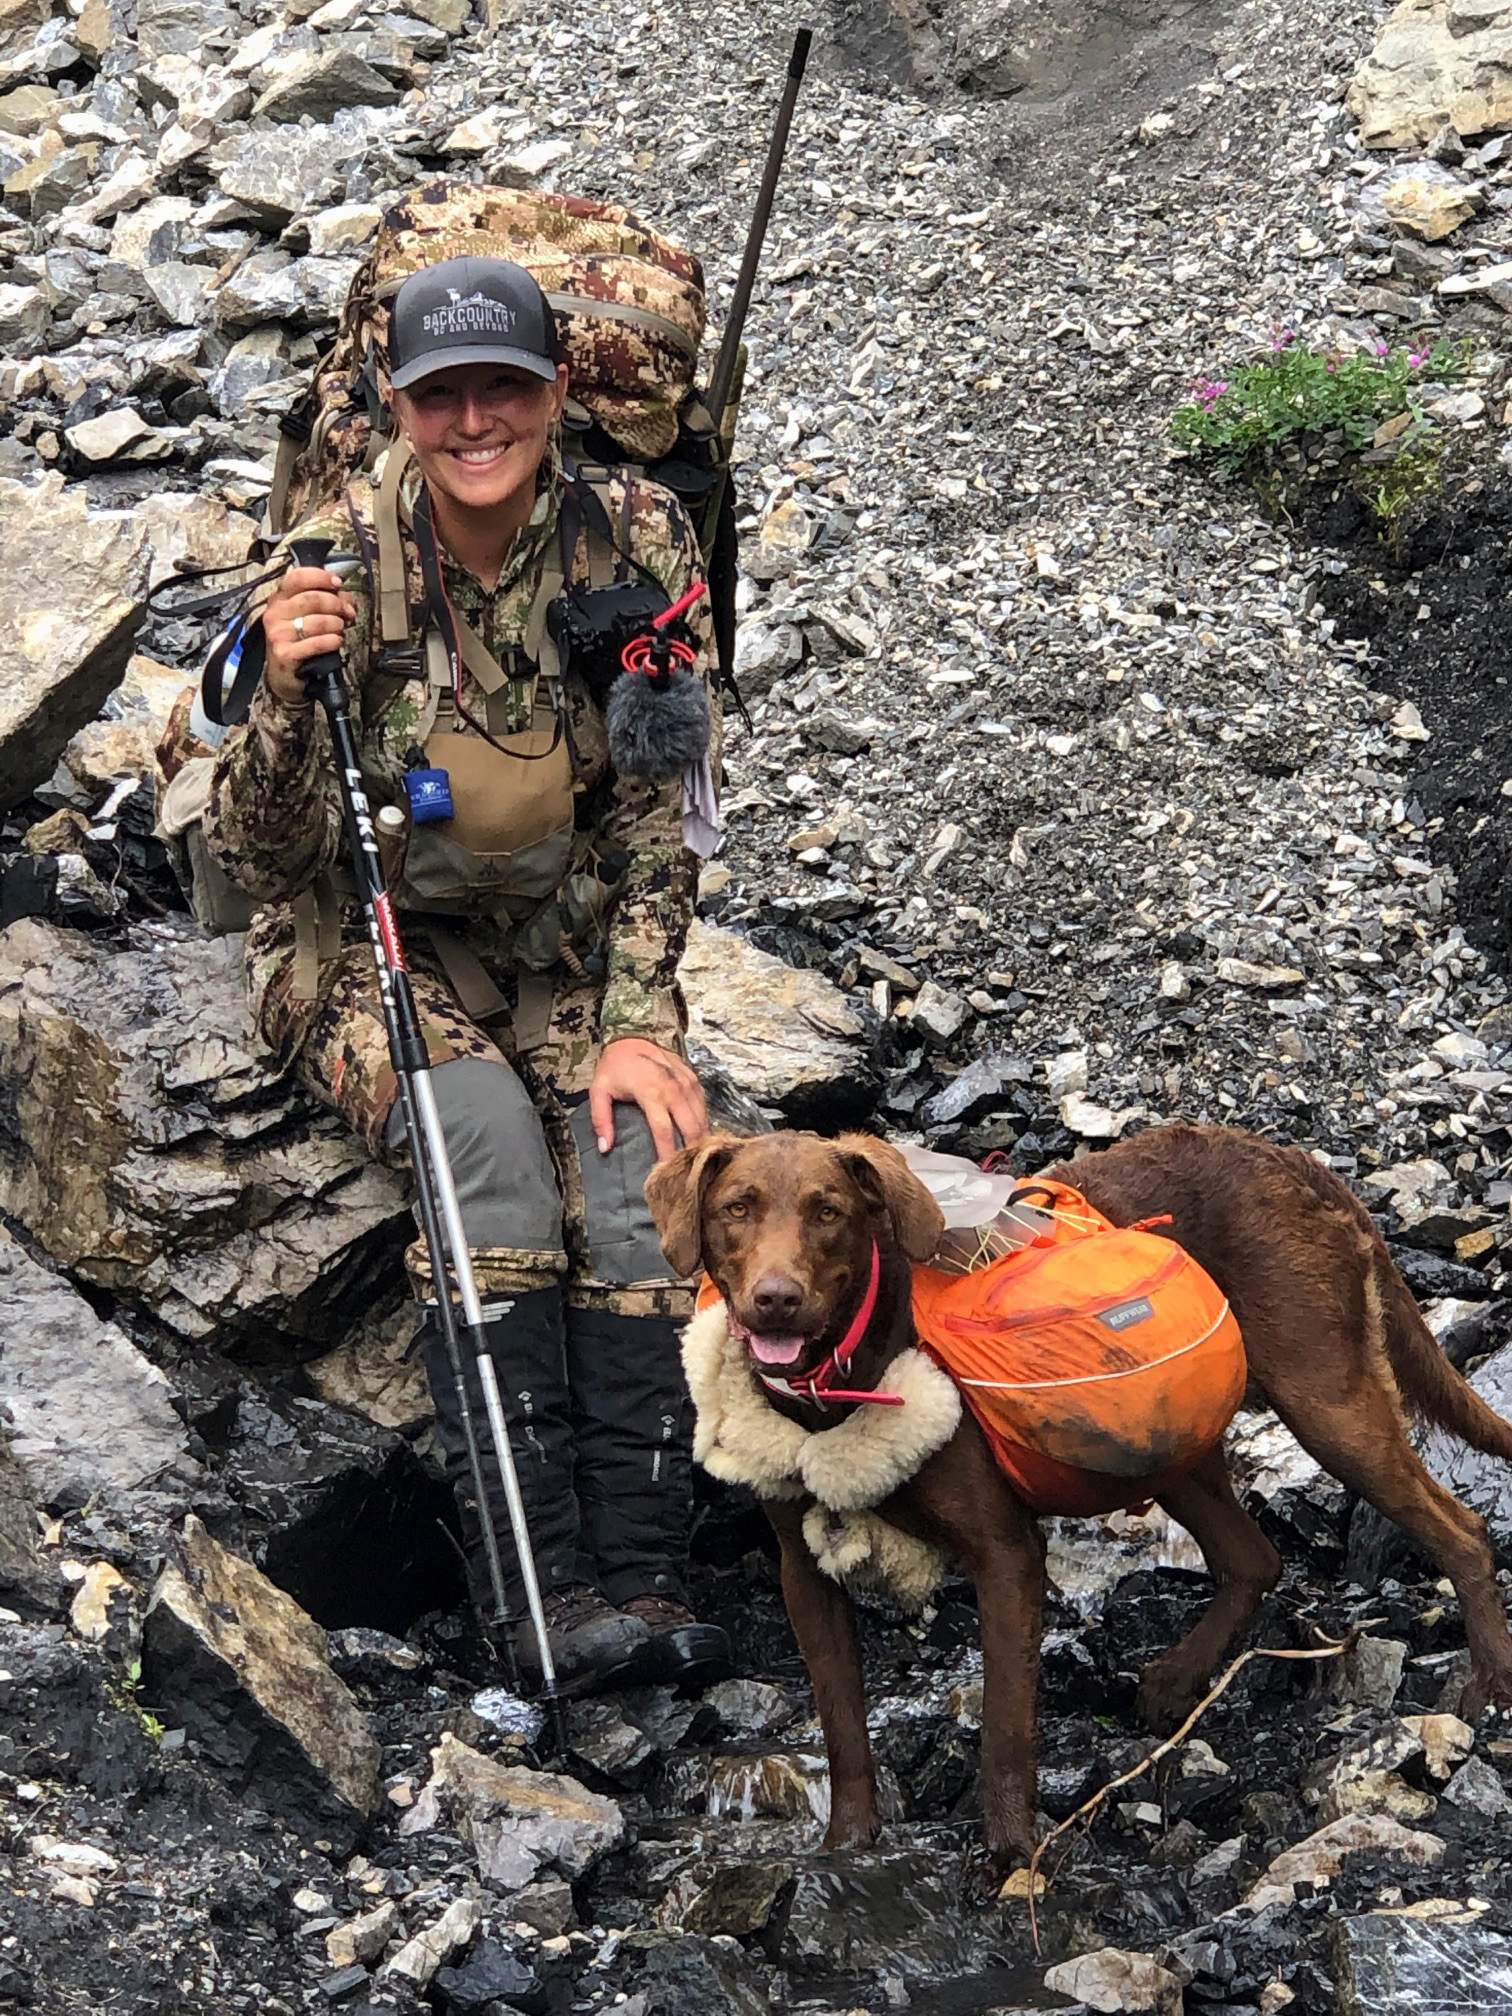 A female big-game guide with trekking poles and a heavy pack rests on a rock beside her dog.